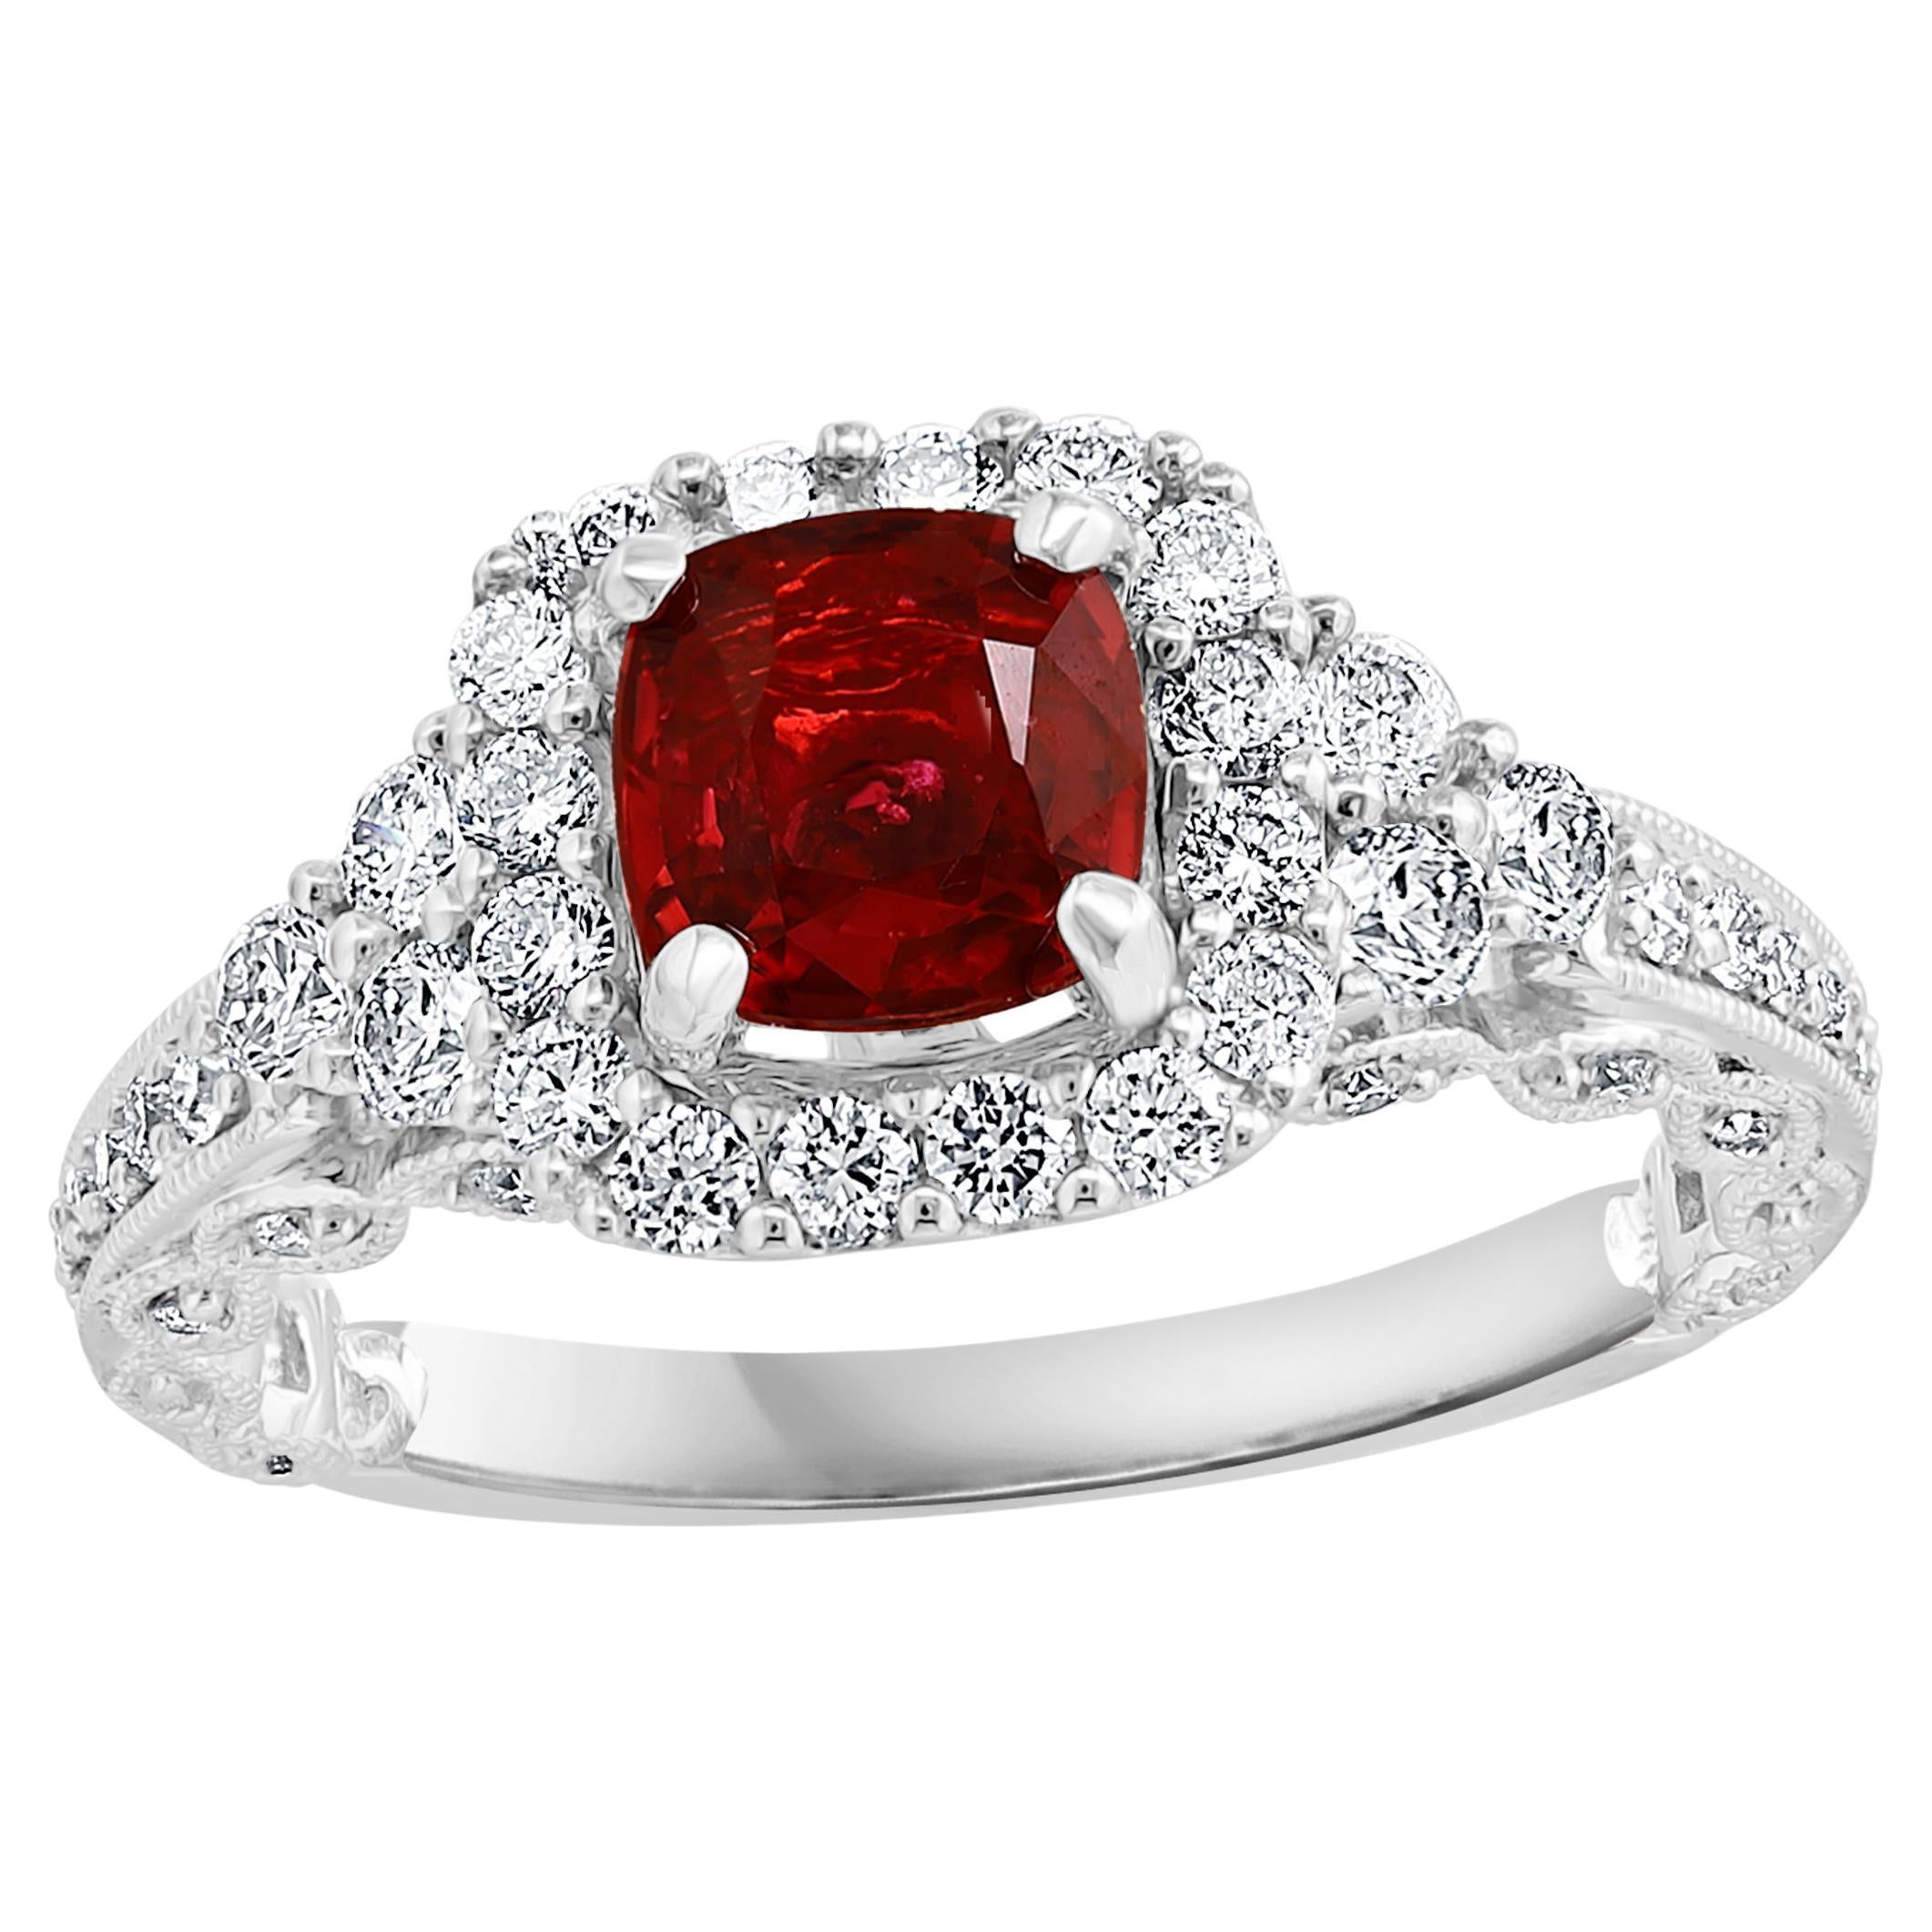 1.07 Carat Cushion Cut Ruby and Diamond Fashion Ring in 18K White Gold For Sale